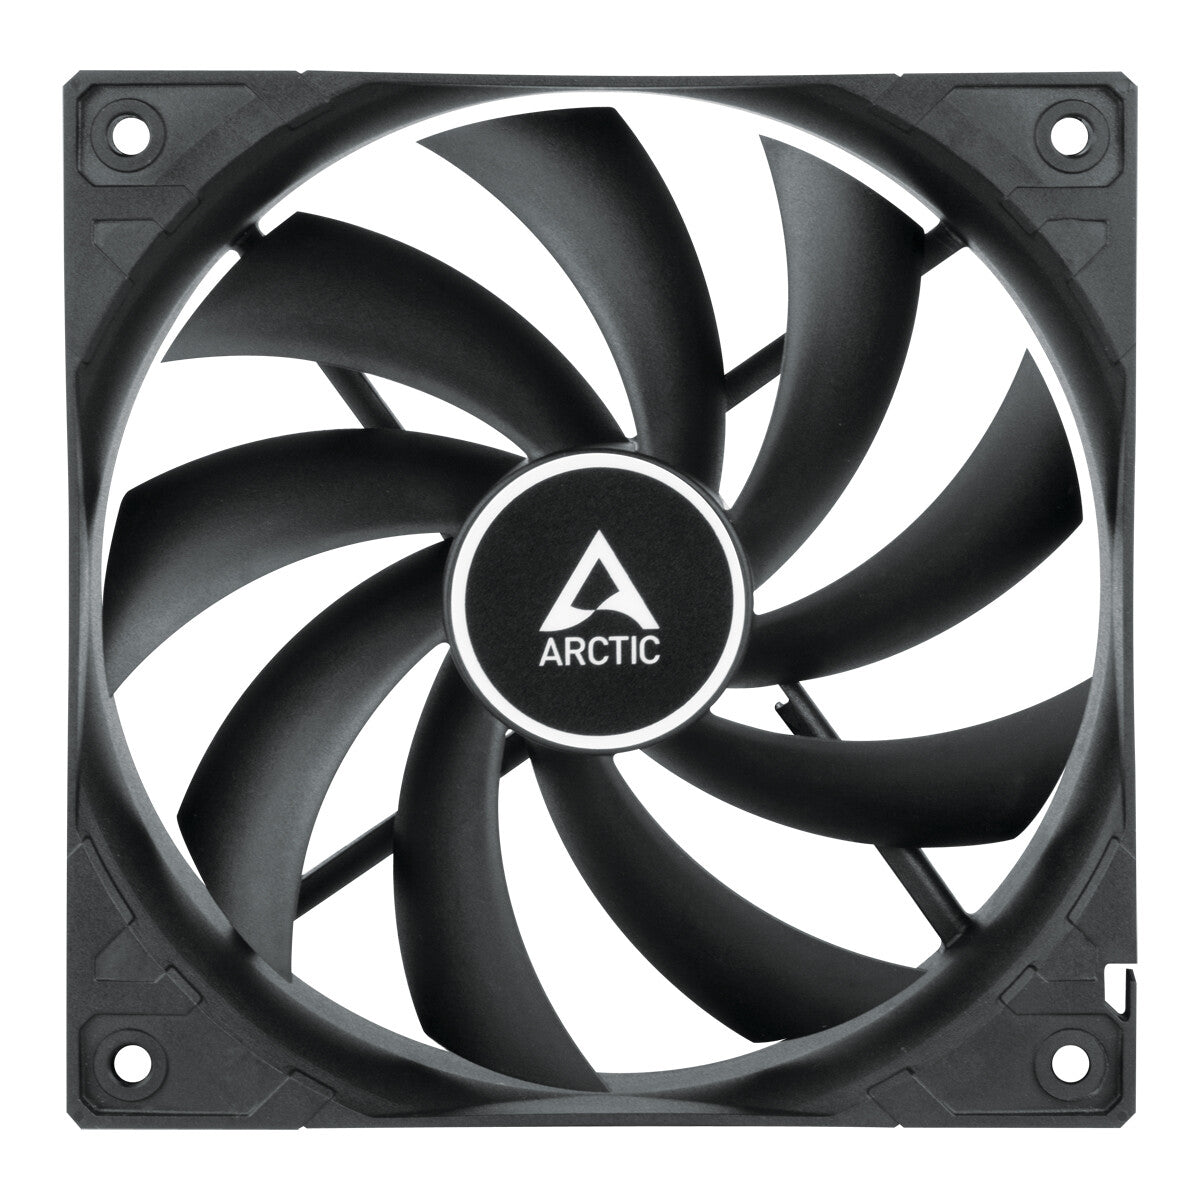 ARCTIC F12 PWM PST - Computer Case Fan in Black - 120mm (Pack of 5)